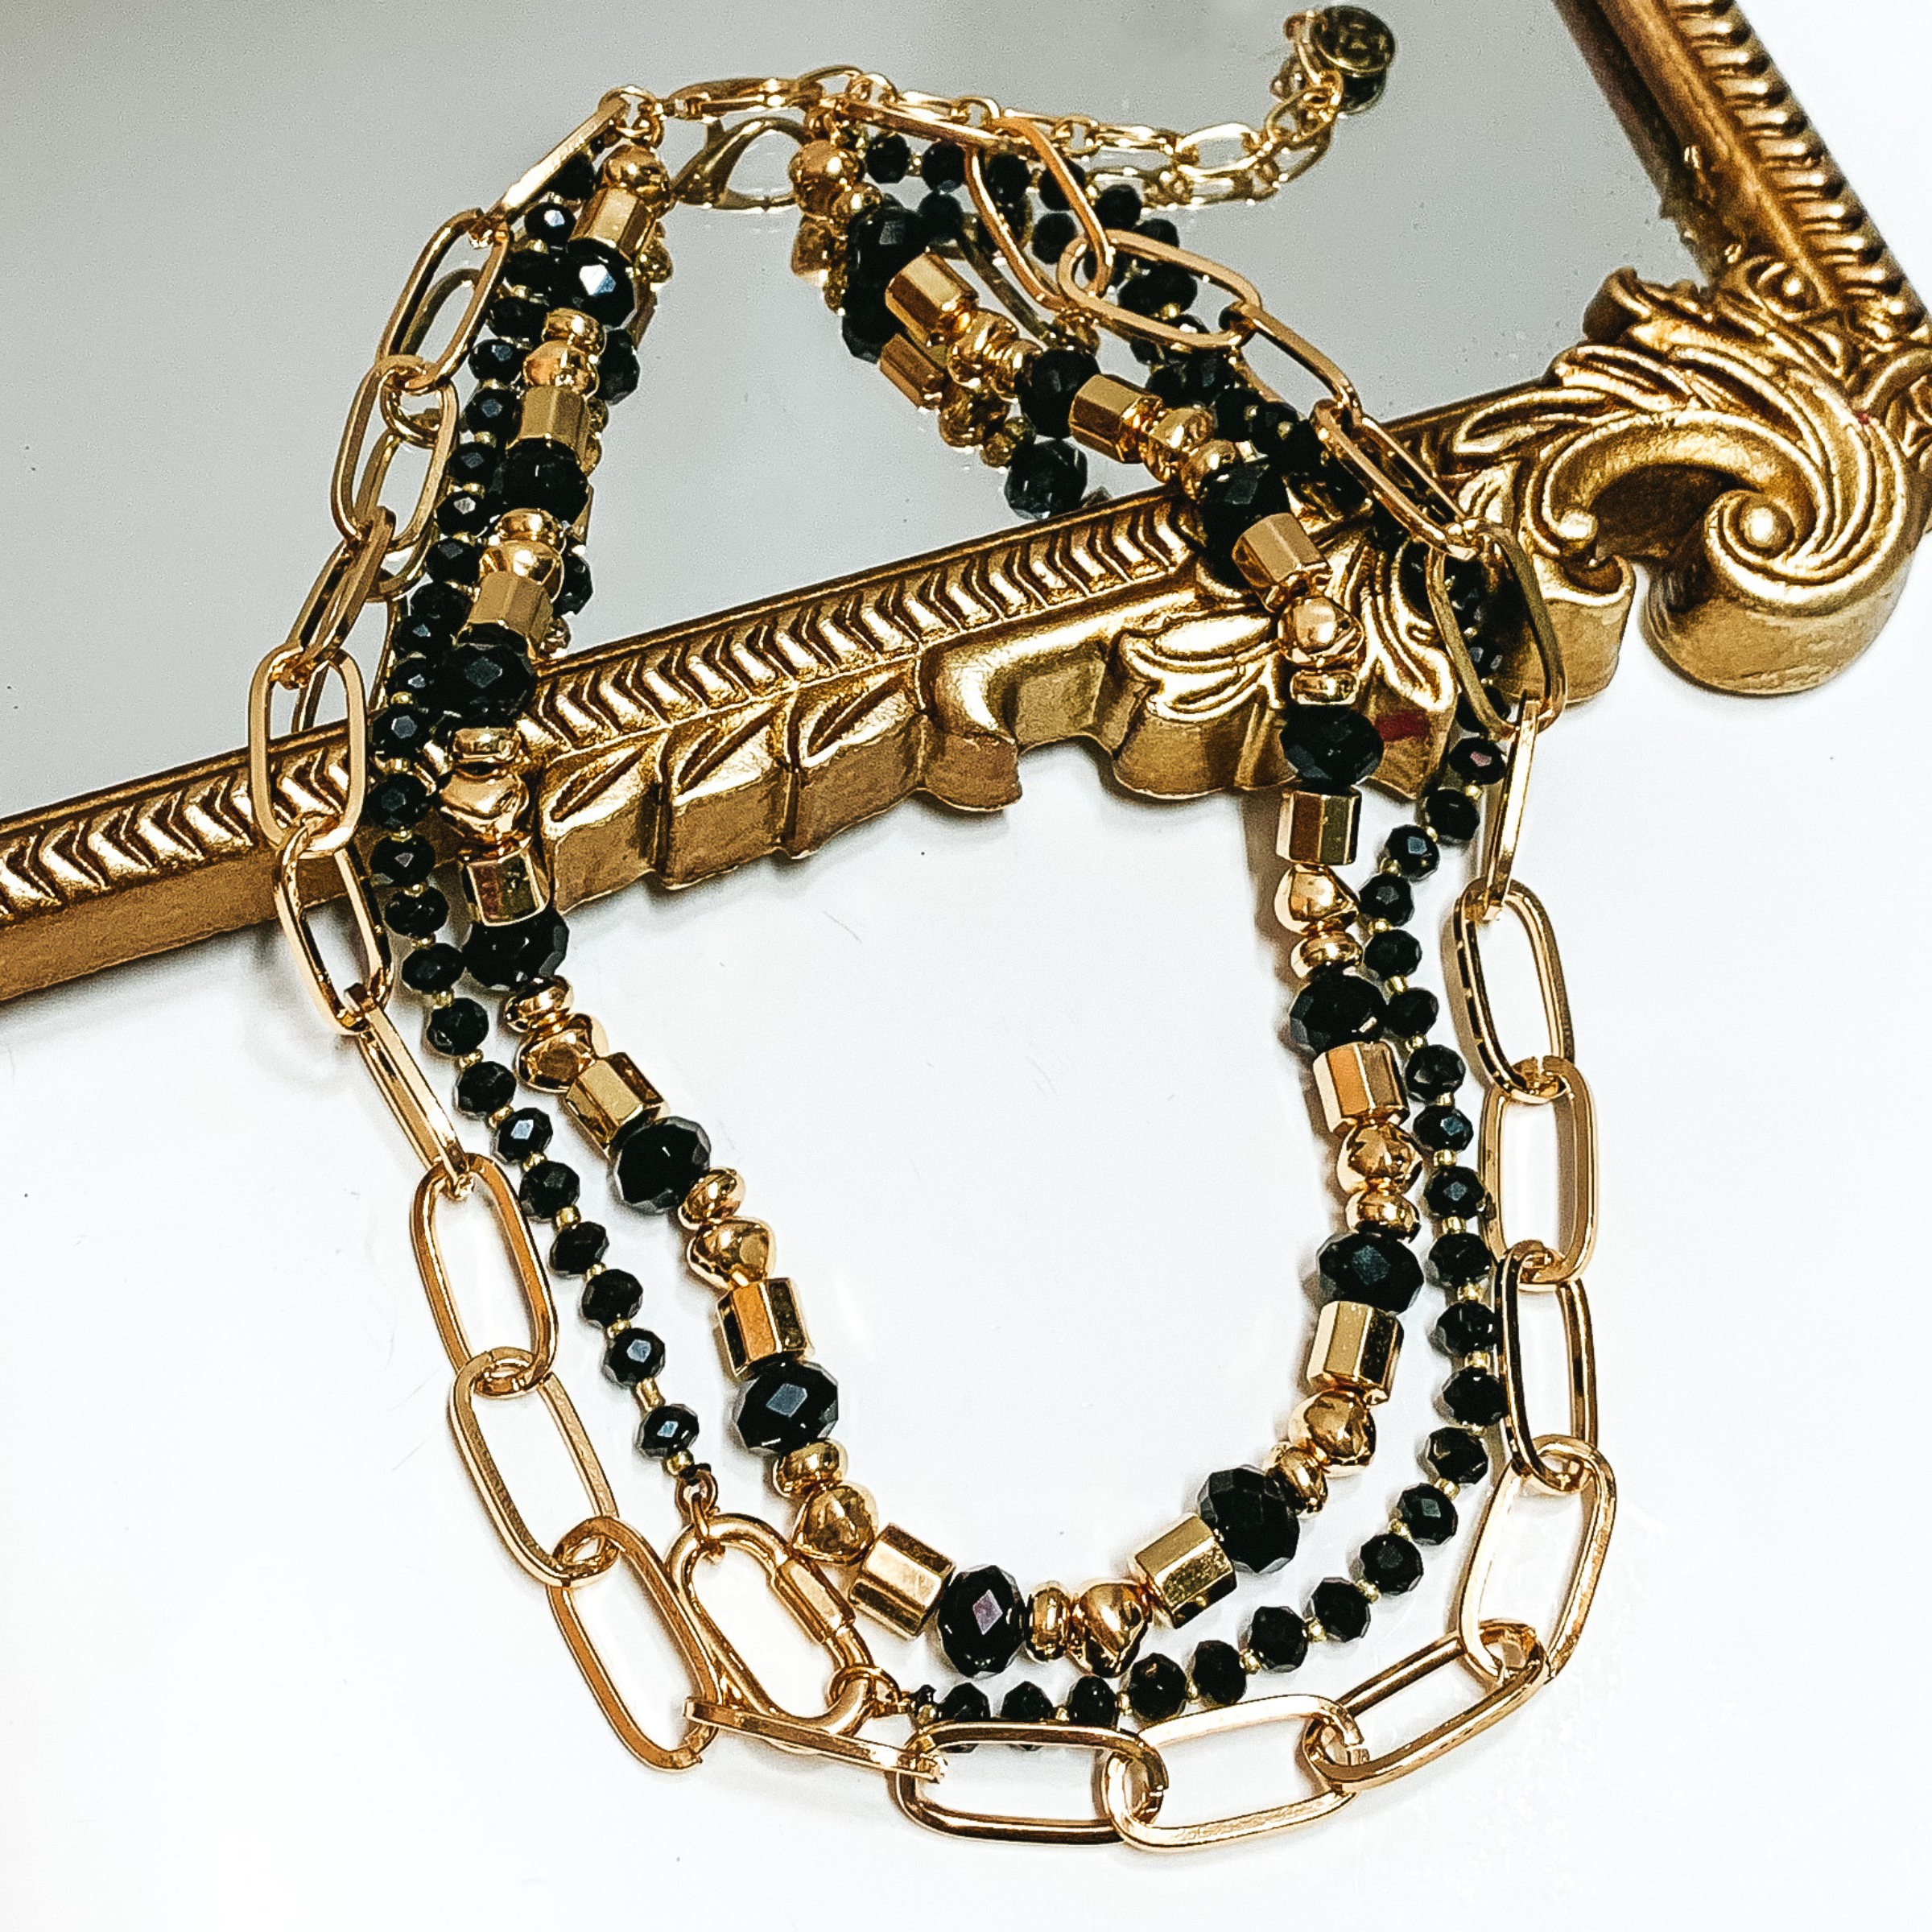 Black and gold beaded three strand necklace. This necklace includes a large, gold chain link strand. This necklace is pictured partially laying on a mirror on a white background. 